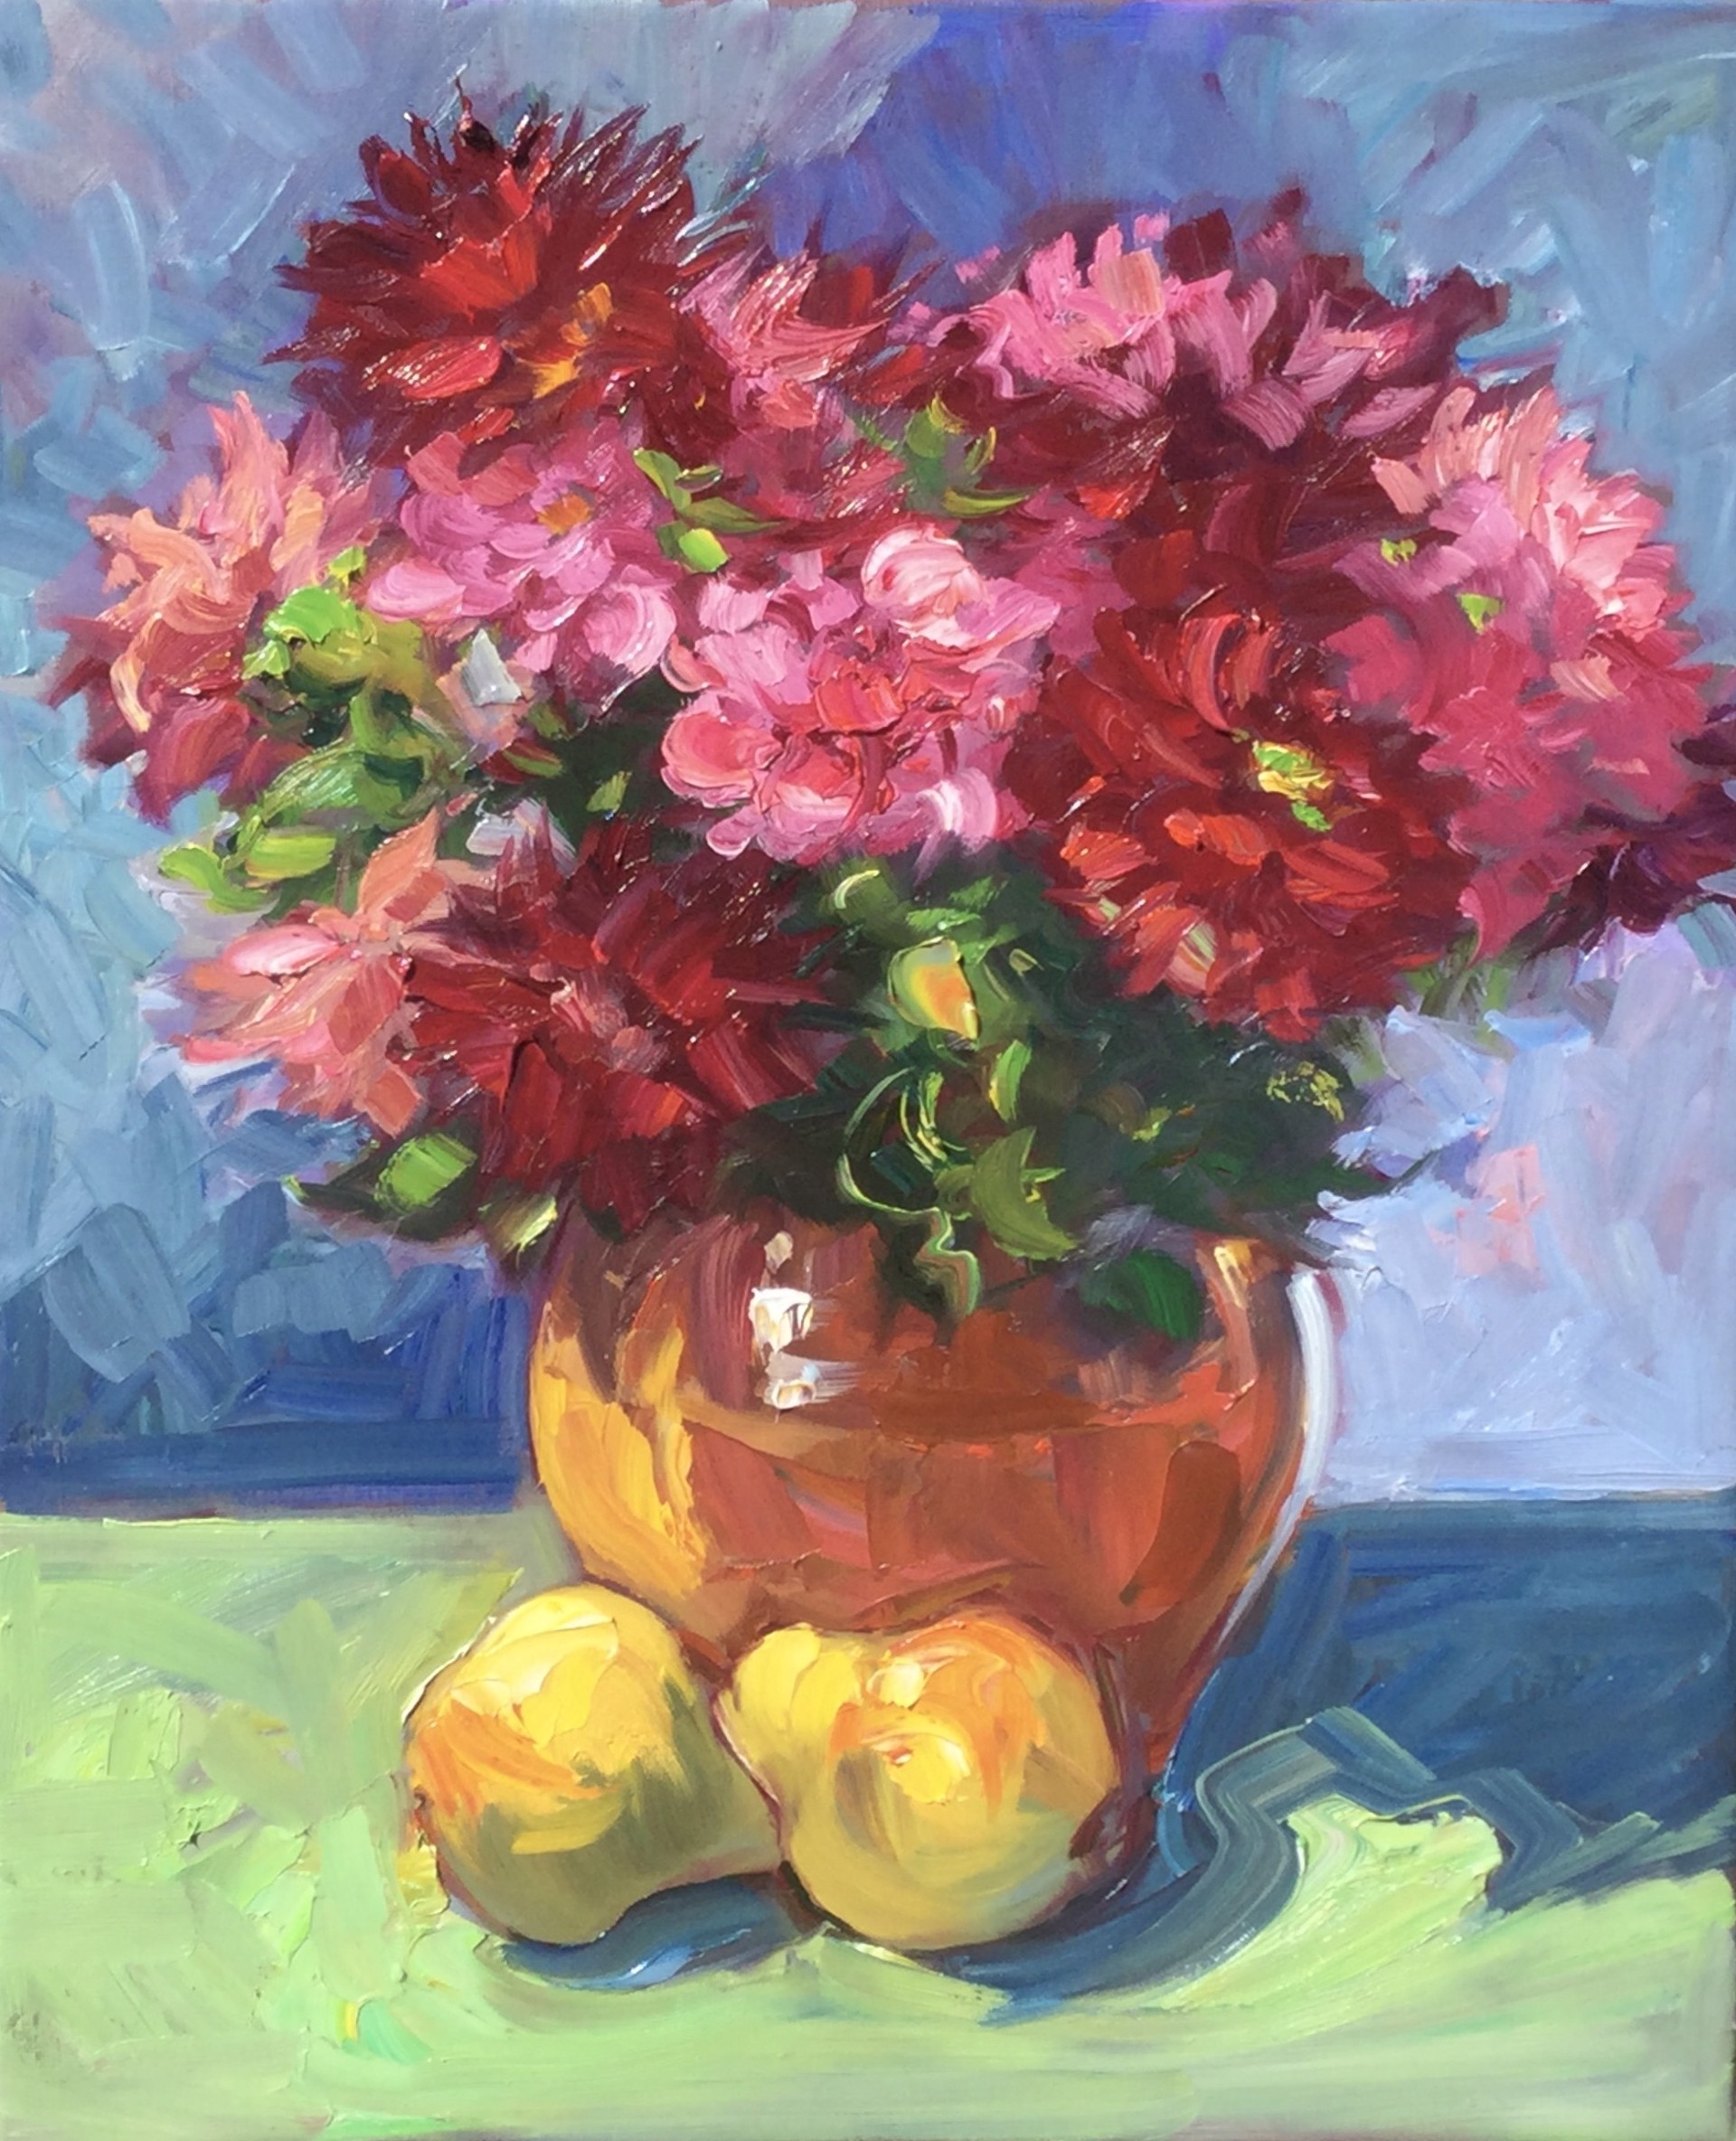 Red & Pink Provencal Roses by Maria Bertrán